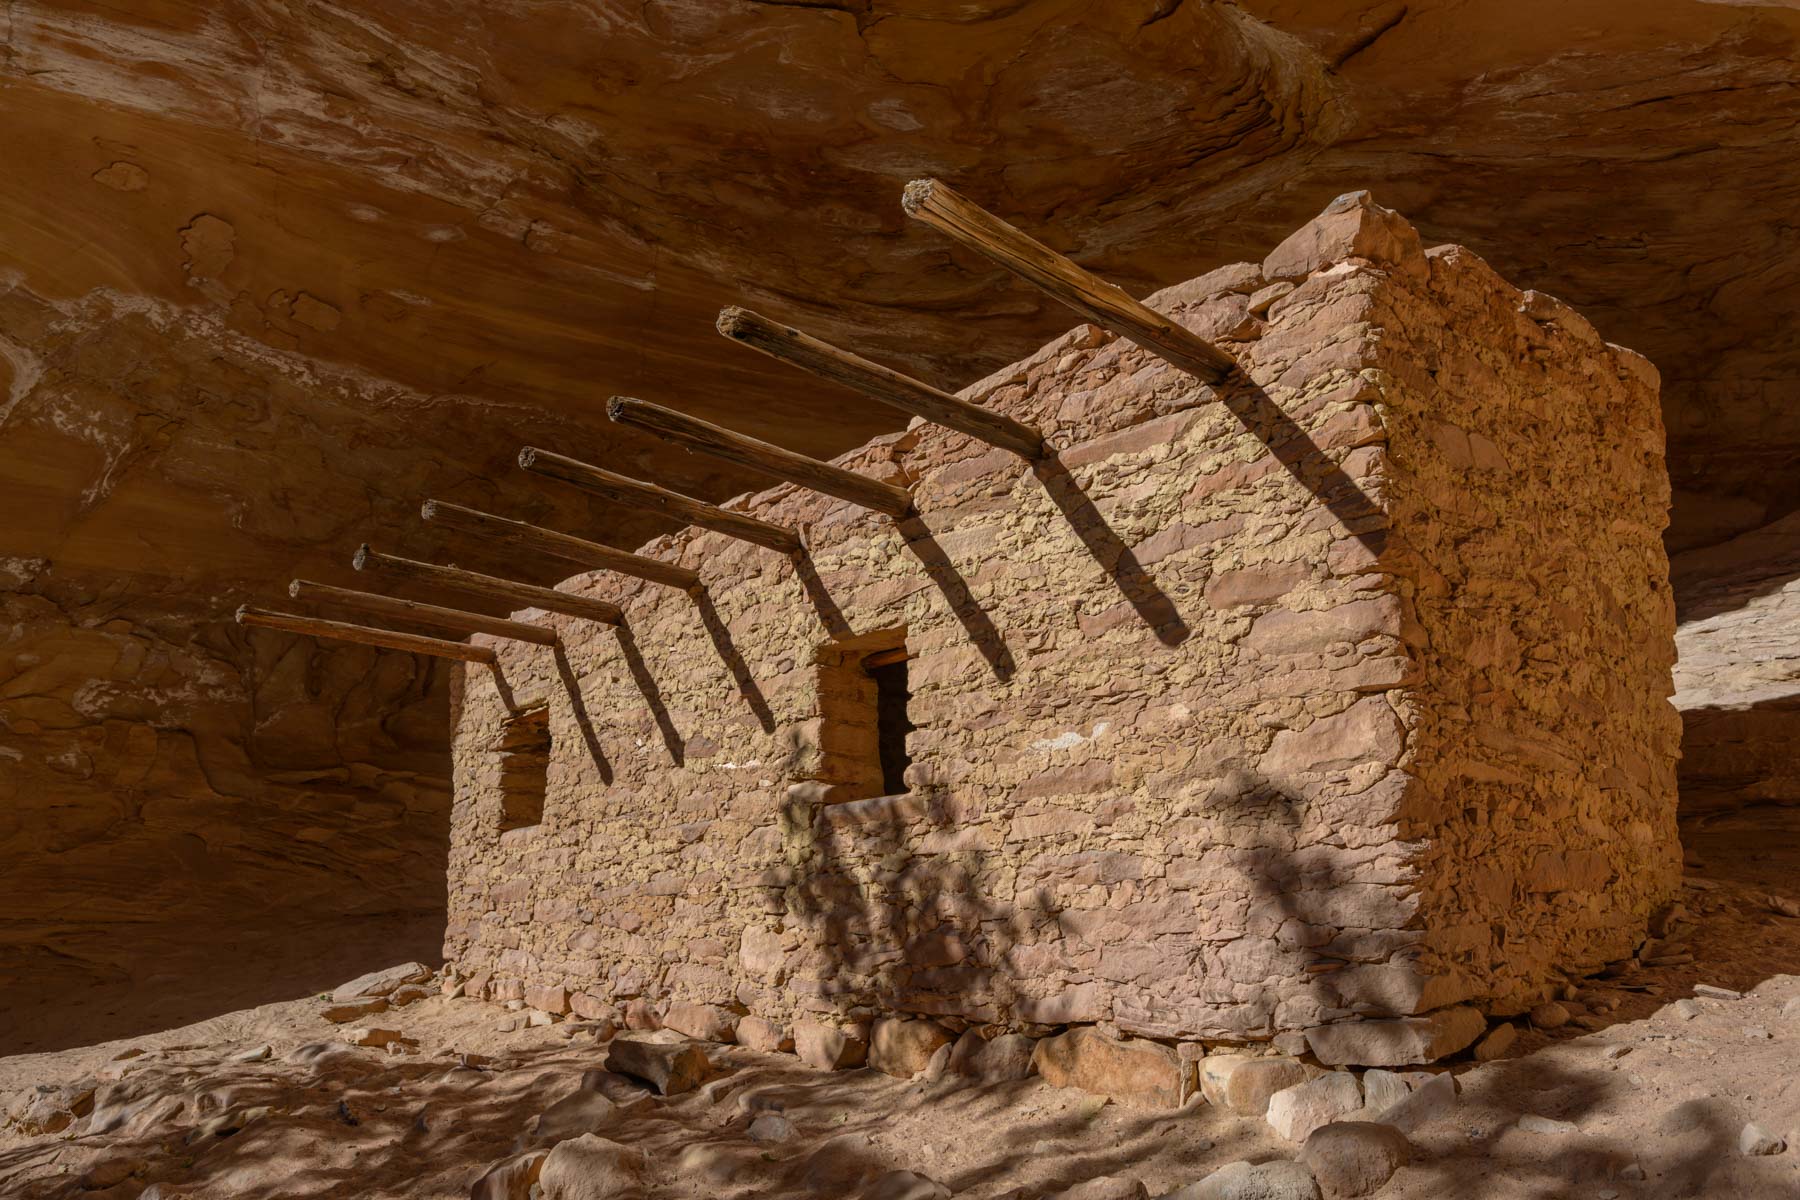 Late light at the Dollhouse ruin in northern Bear Ears NM, Utah